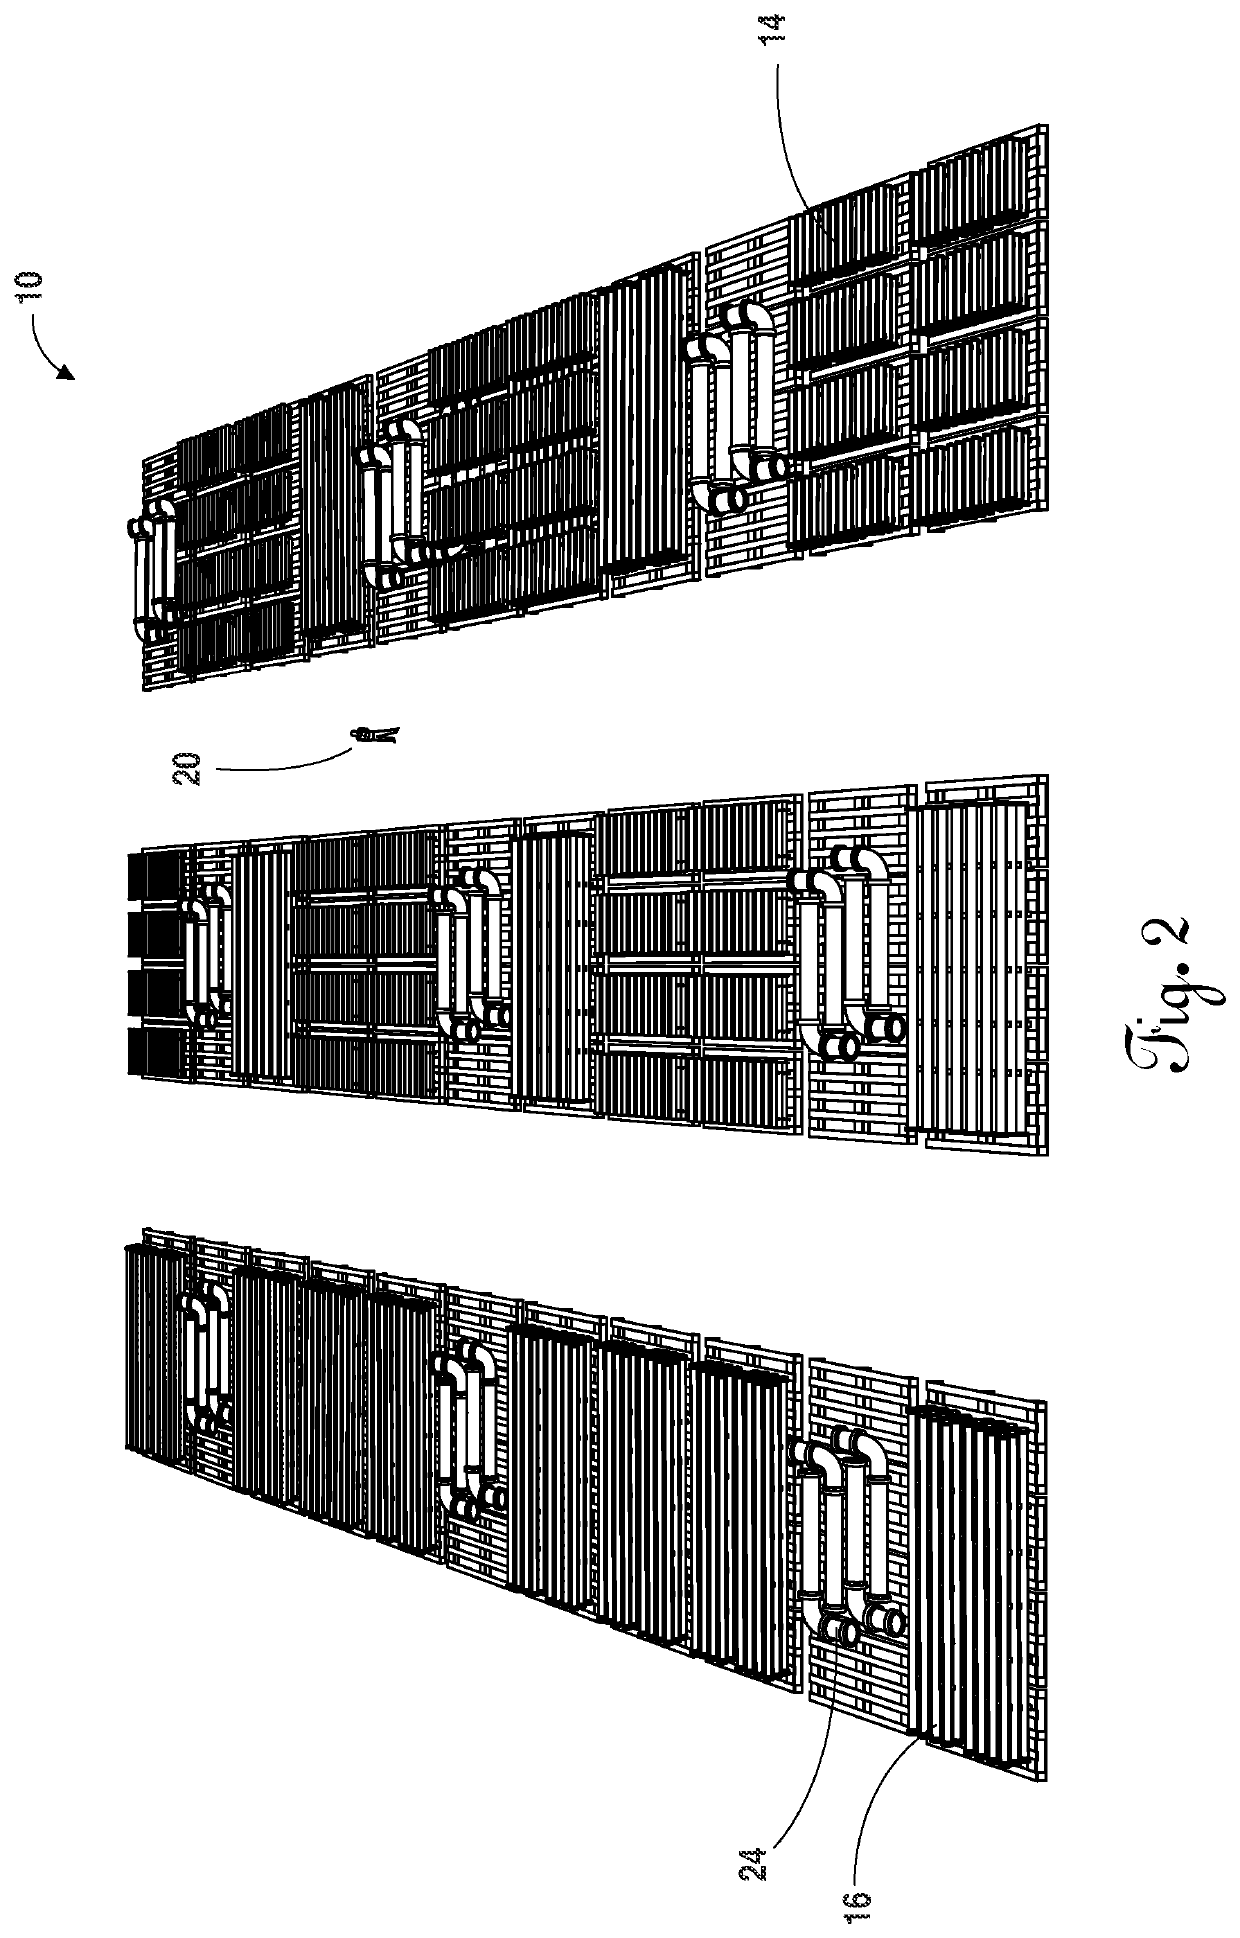 Containerized Shipping, Storage and Inventory System